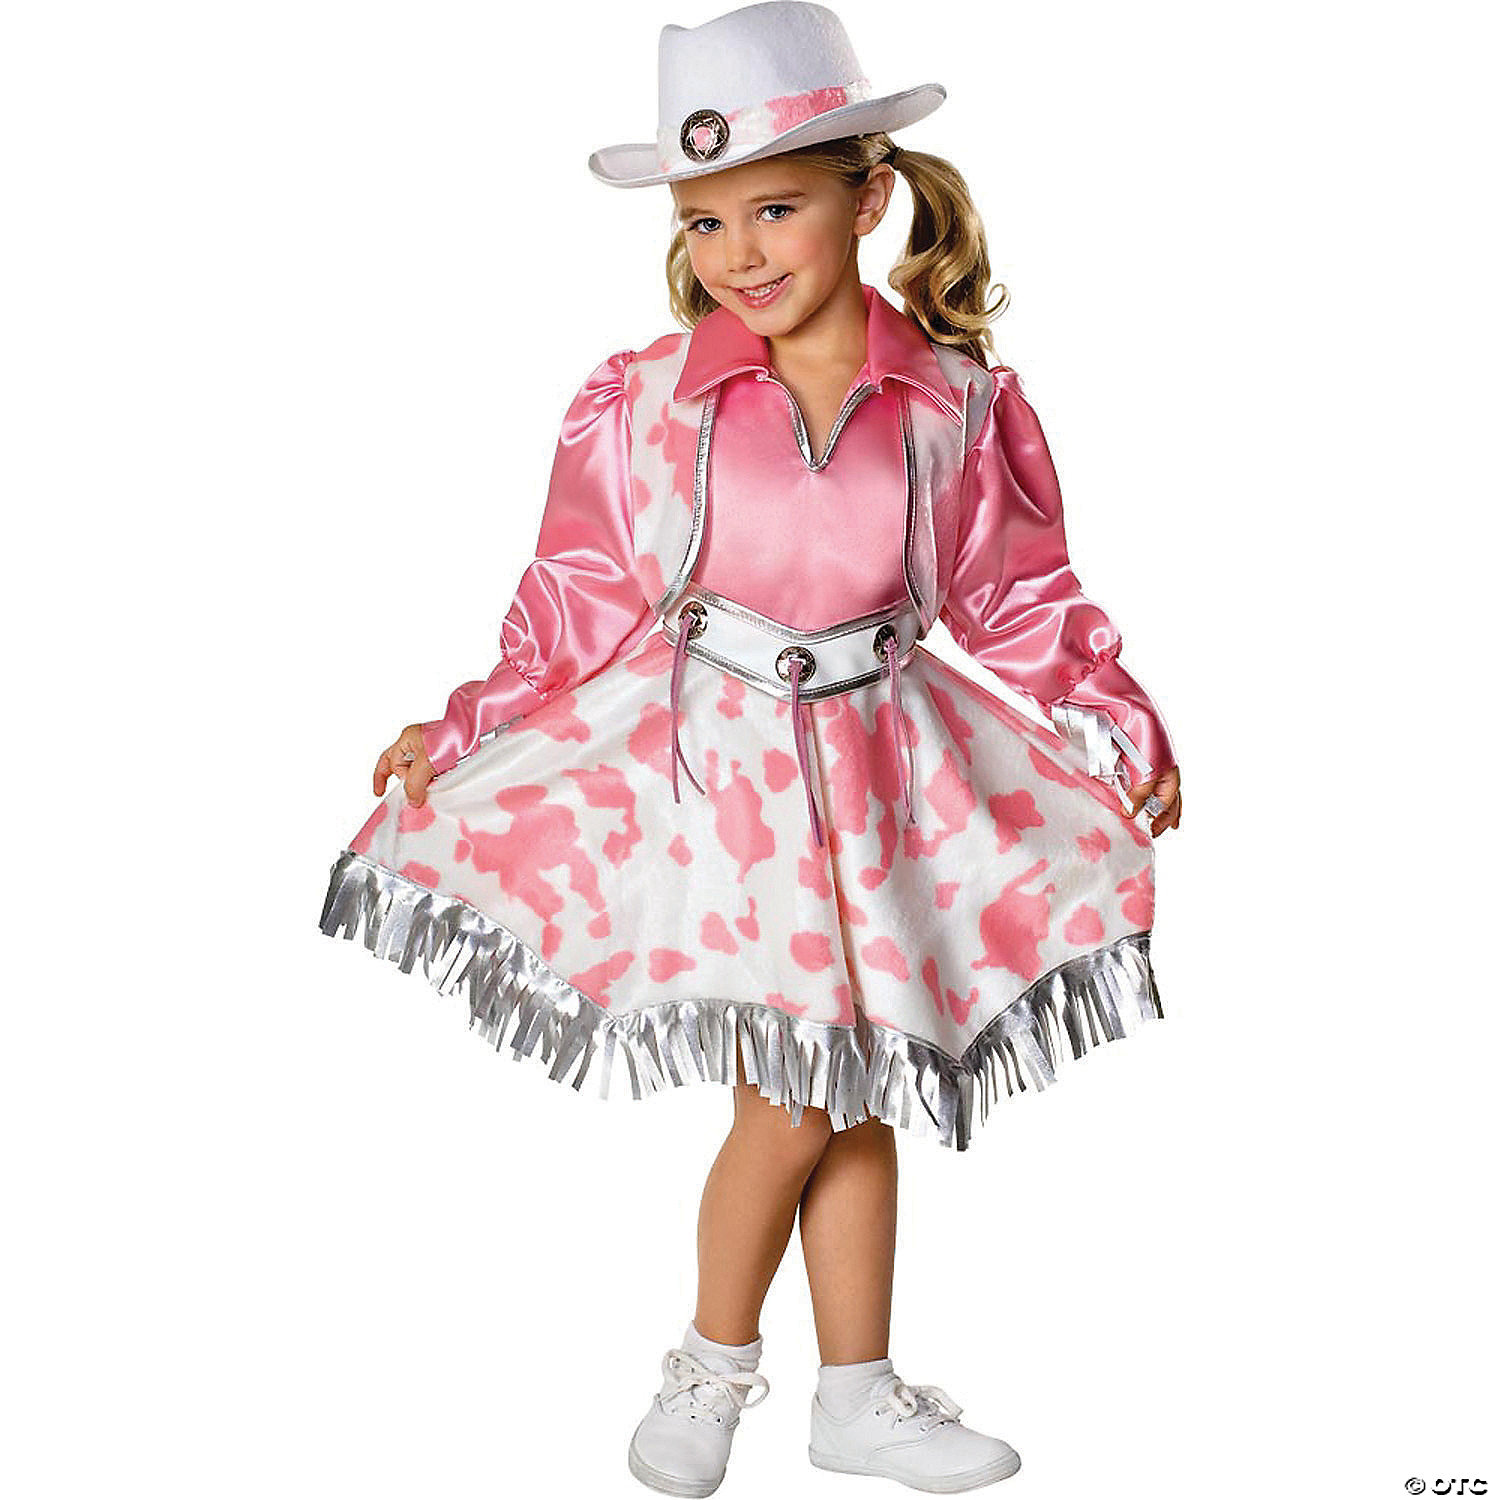 gone crazy actress locate Girl's Western Diva Cowgirl Costume | Oriental Trading